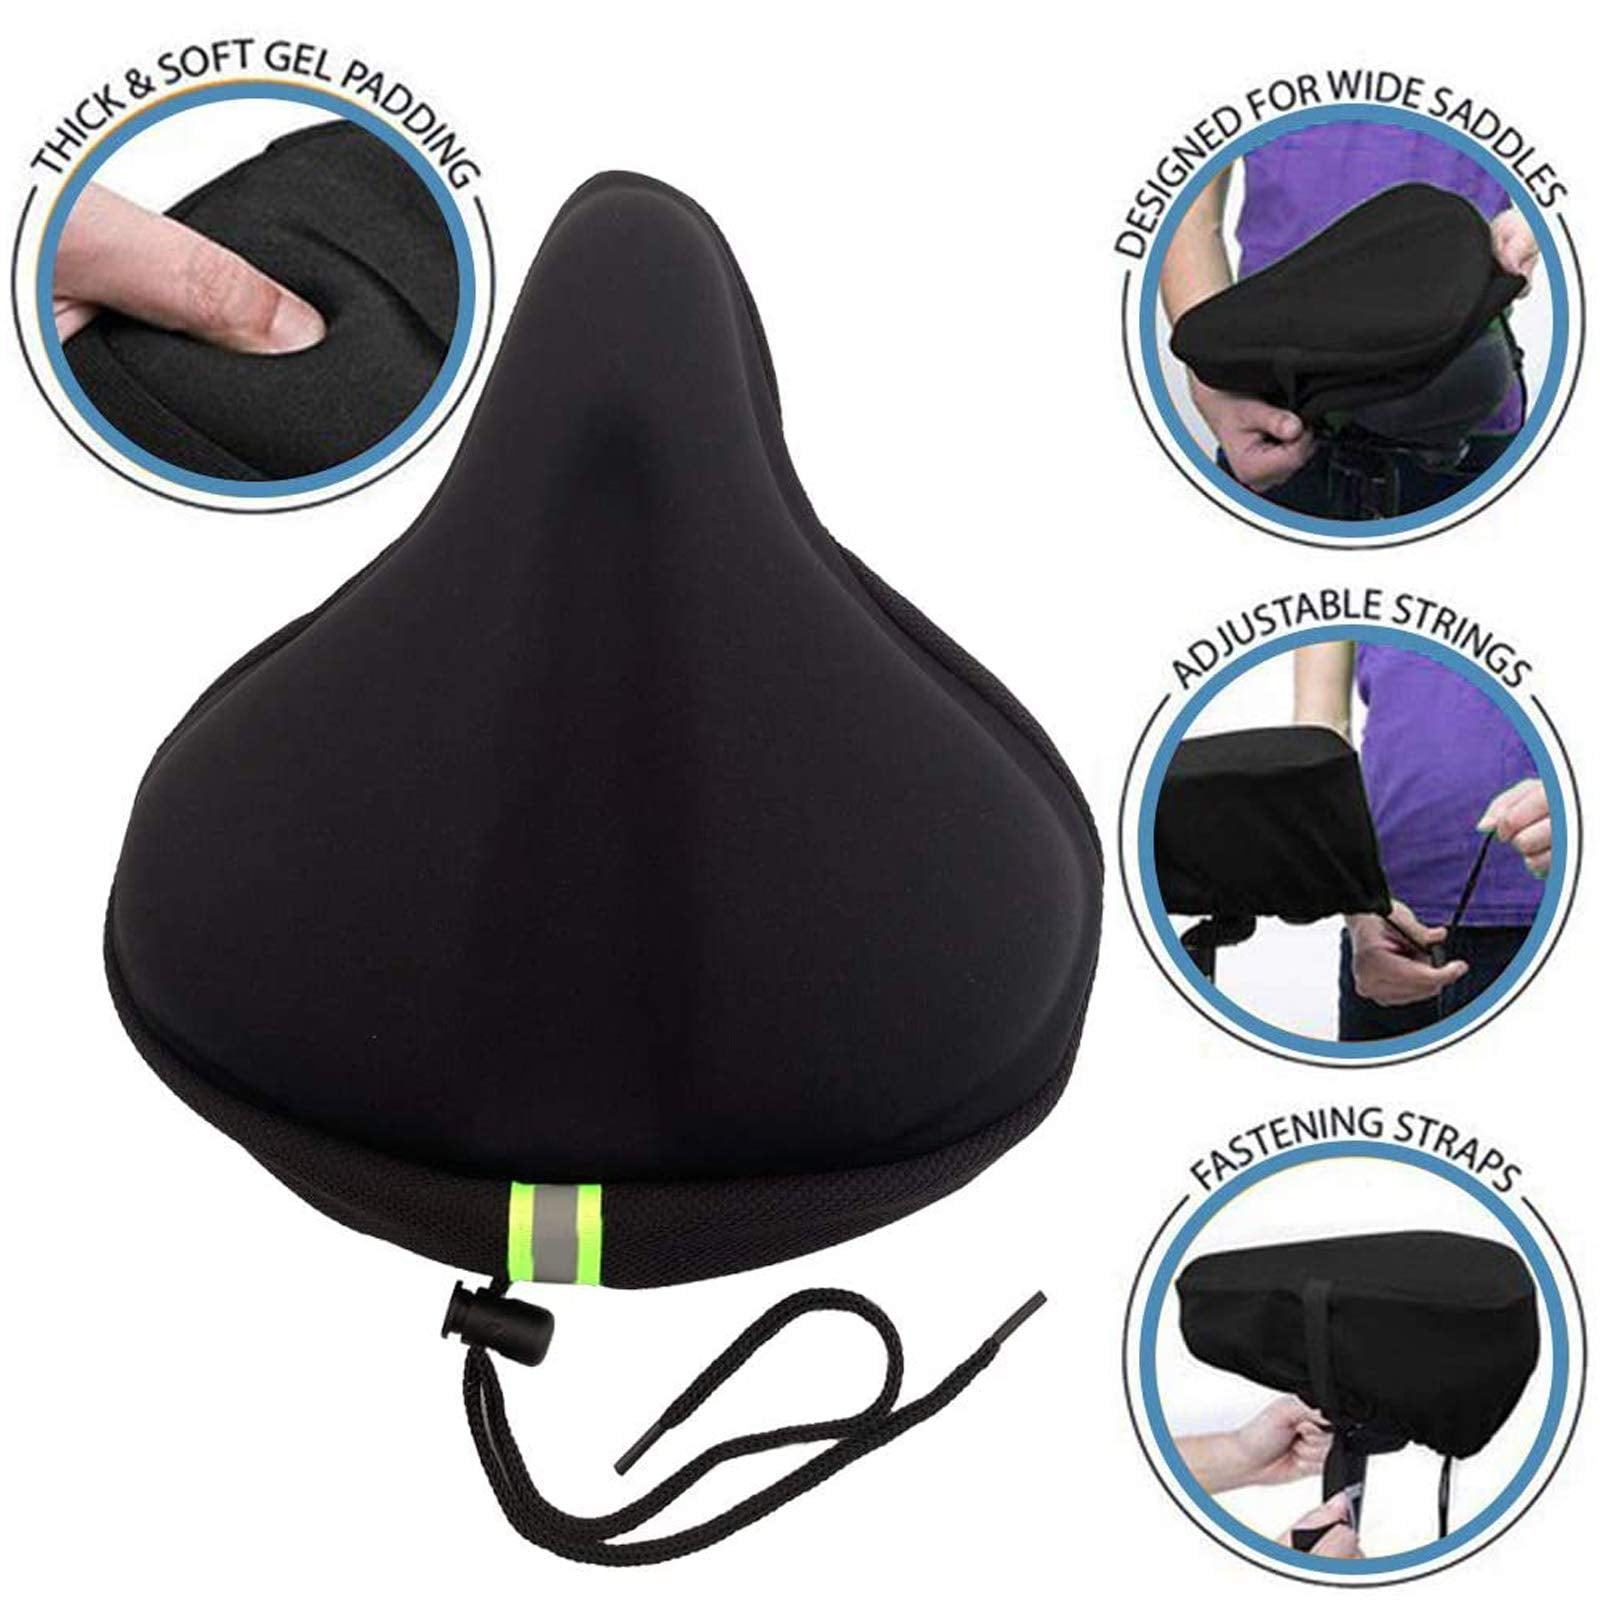 Geronmine Gel Bike Seat Cover Padded Bicycle Saddle Covers for Women & Men,  Most Comfortable Exercise Bike Seat Cushion Cover, Soft for Spin Indoor  Outdoor Cycling Class Mountain Stationary Bikes Black